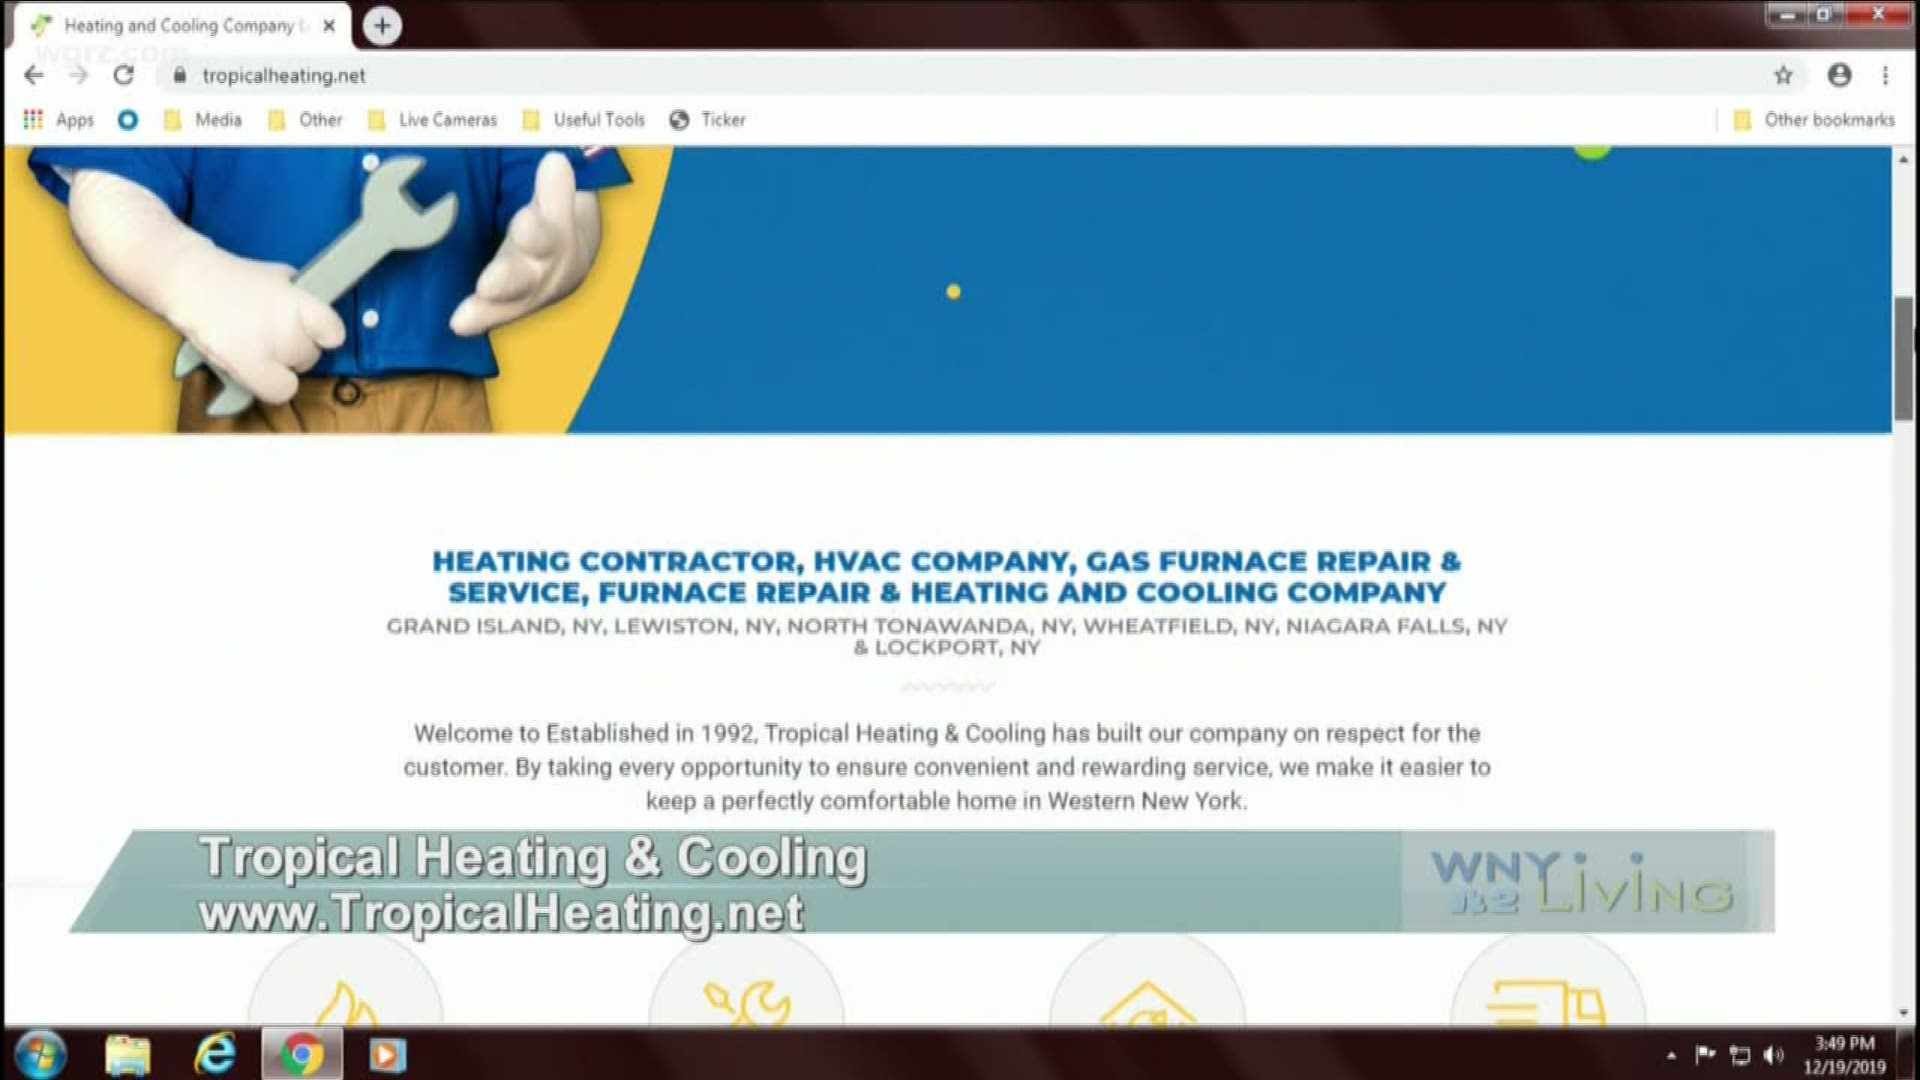 WNY Living - January 26 - Tropical Heating and Cooling (THIS VIDEO IS SPONSORED BY TROPICAL HEATING AND COOLING)